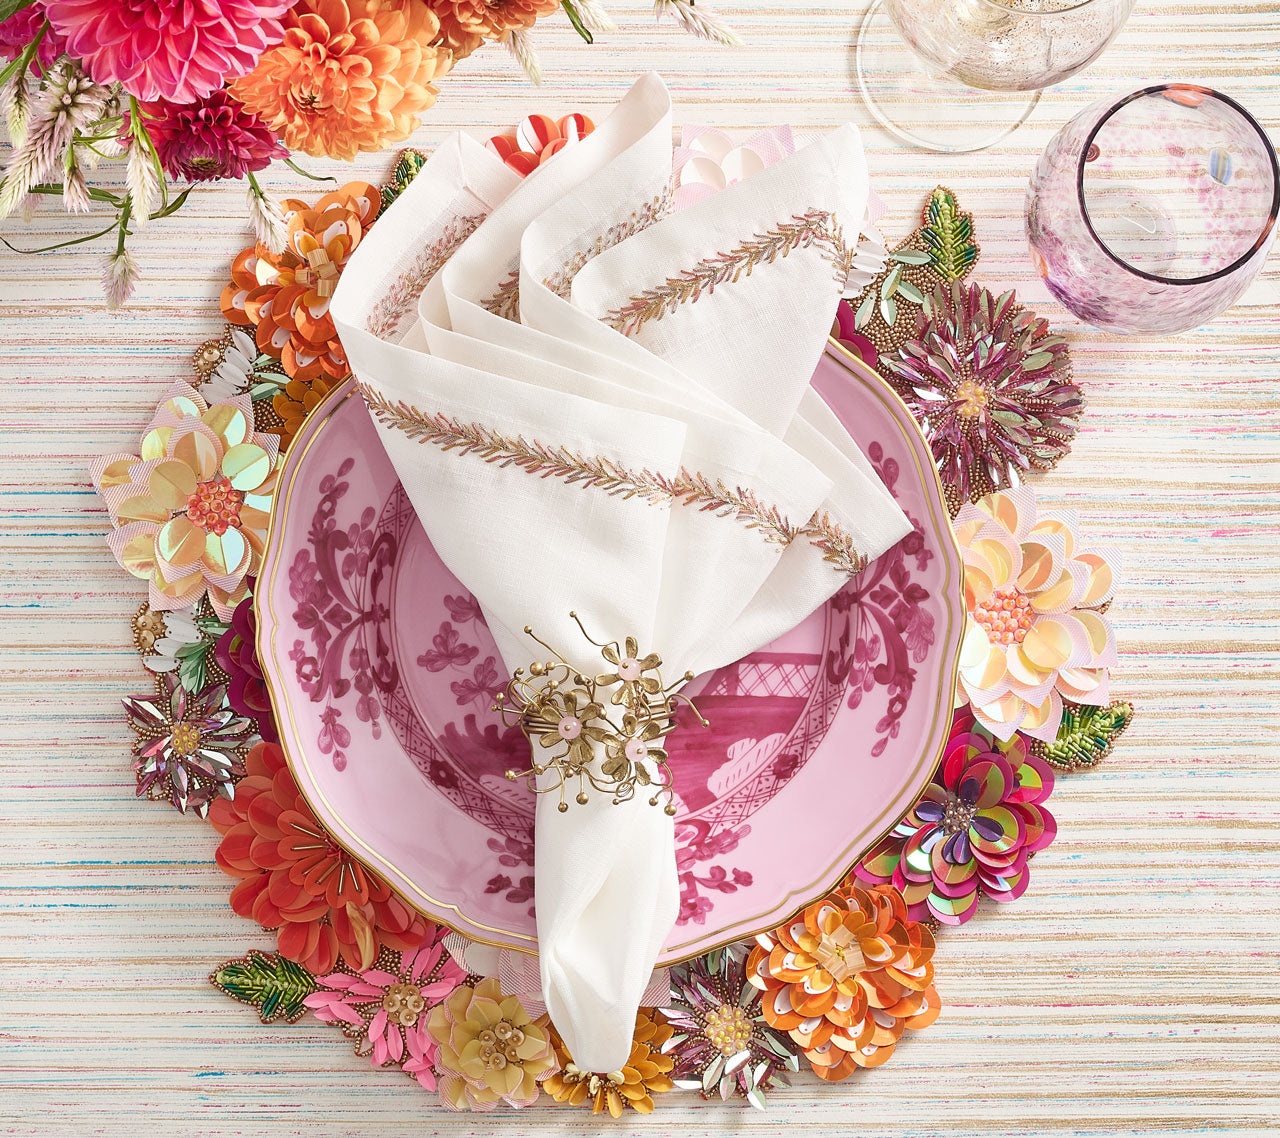 Place setting with a floral placemat, pink plate, white napkin and a blush & gold Flora Napkin Ring 